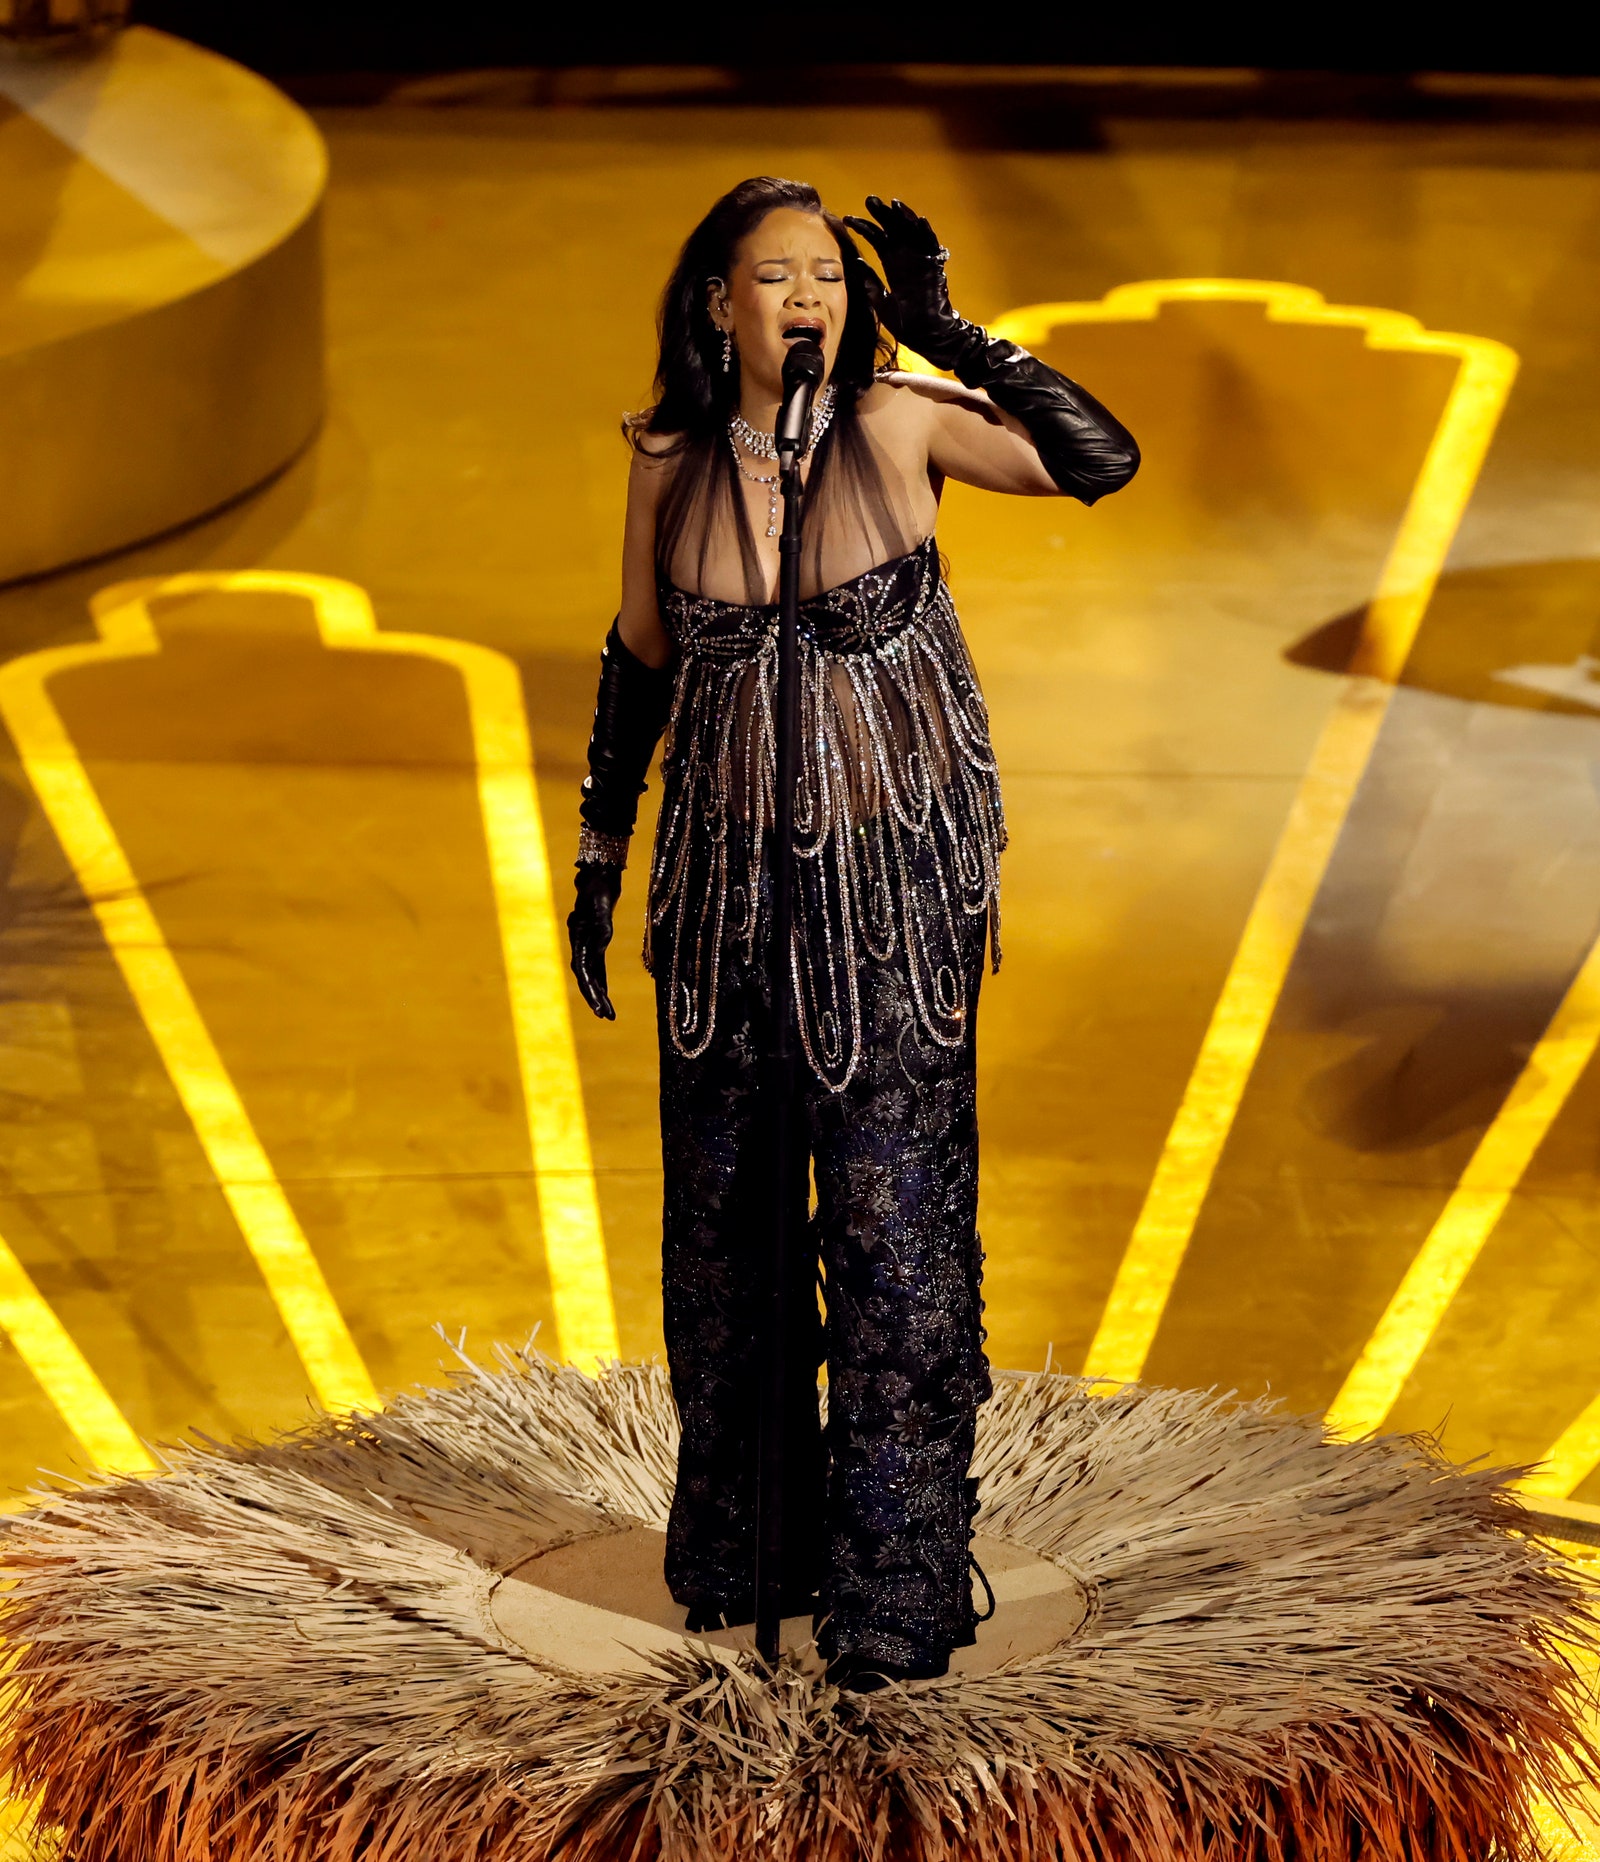 Rihanna Swapped Her Leather Look for a Beaded TwoPiece Ensemble for Her Oscars Performance